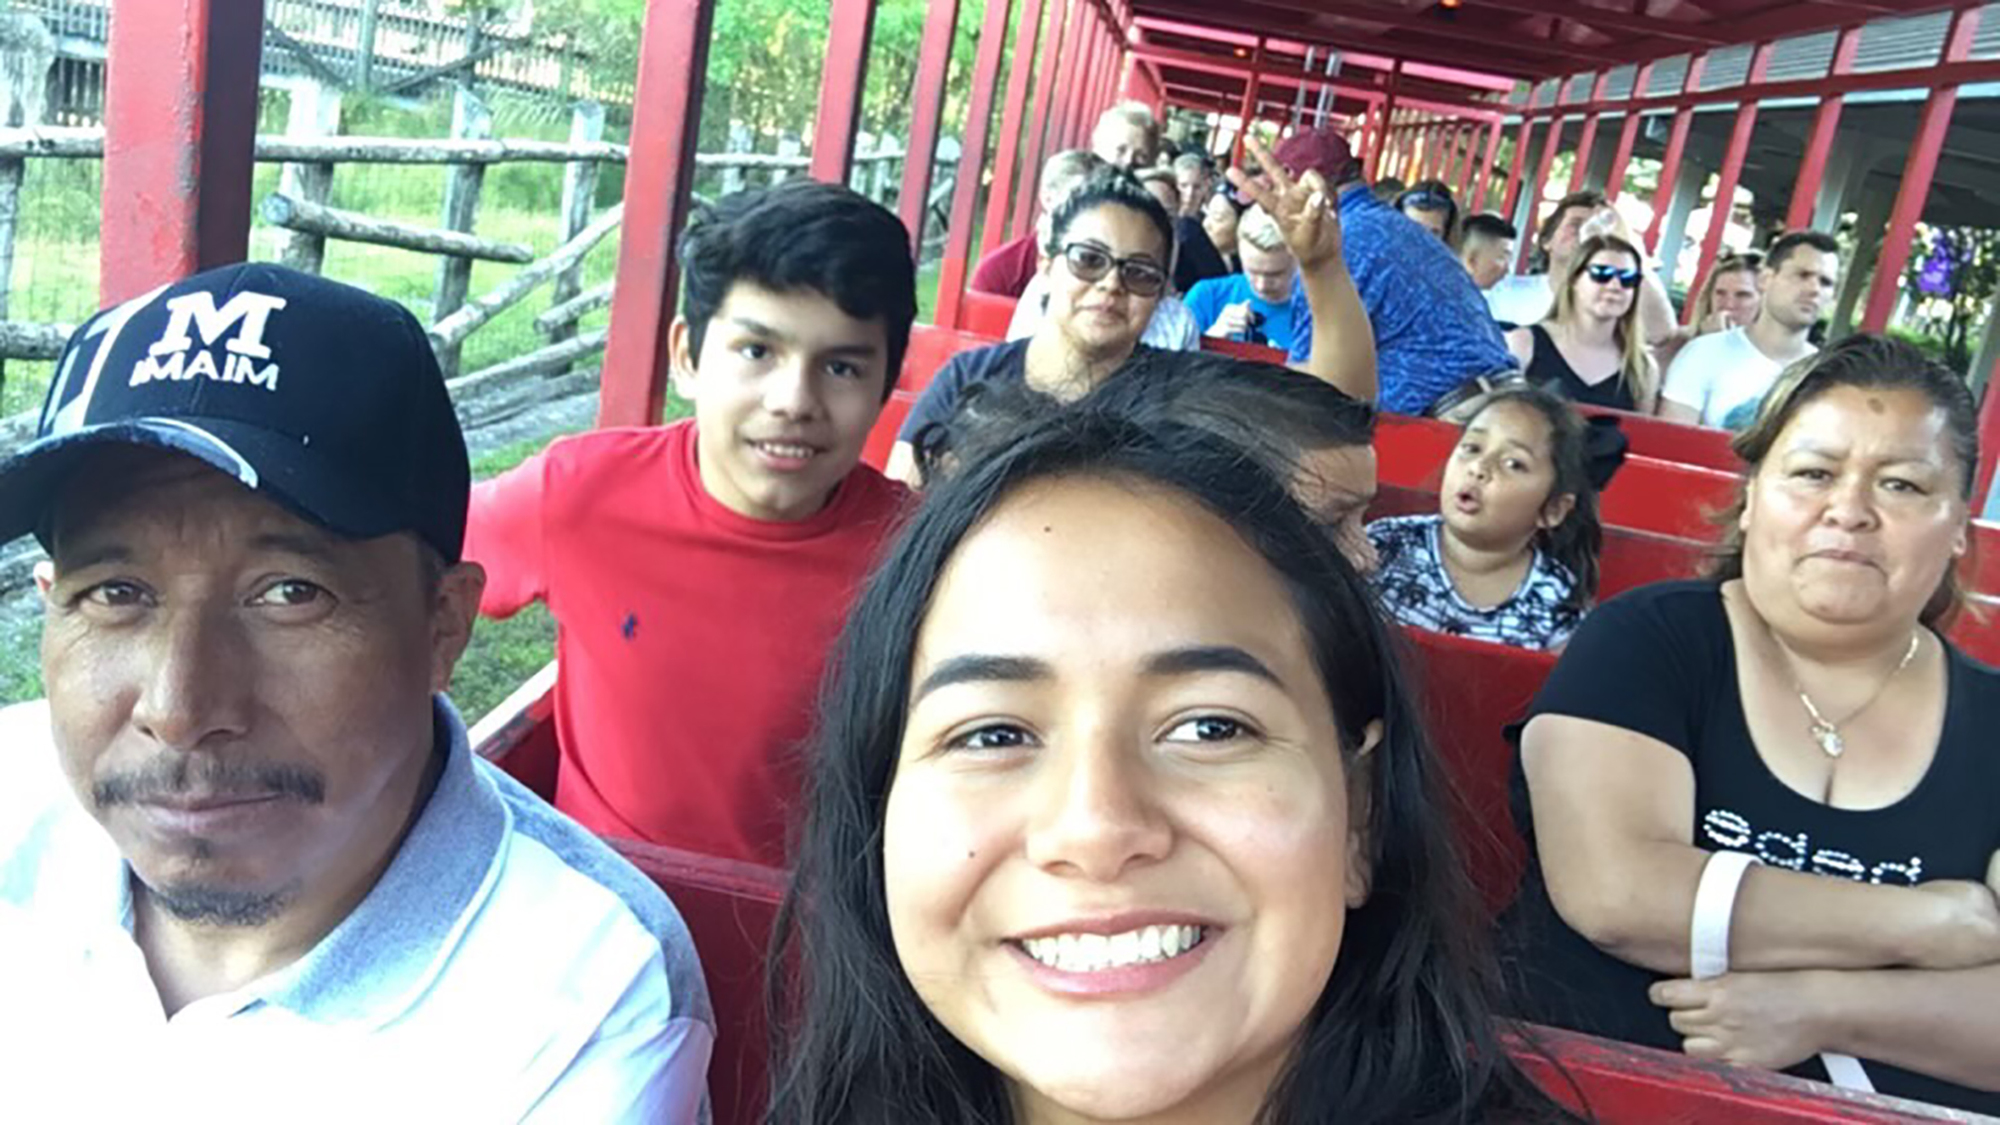 Alejandro Campos, who died in February, spent some happy moments with his daughter, Jennifer Campos, at Busch Gardens in 2019. Courtesy photo